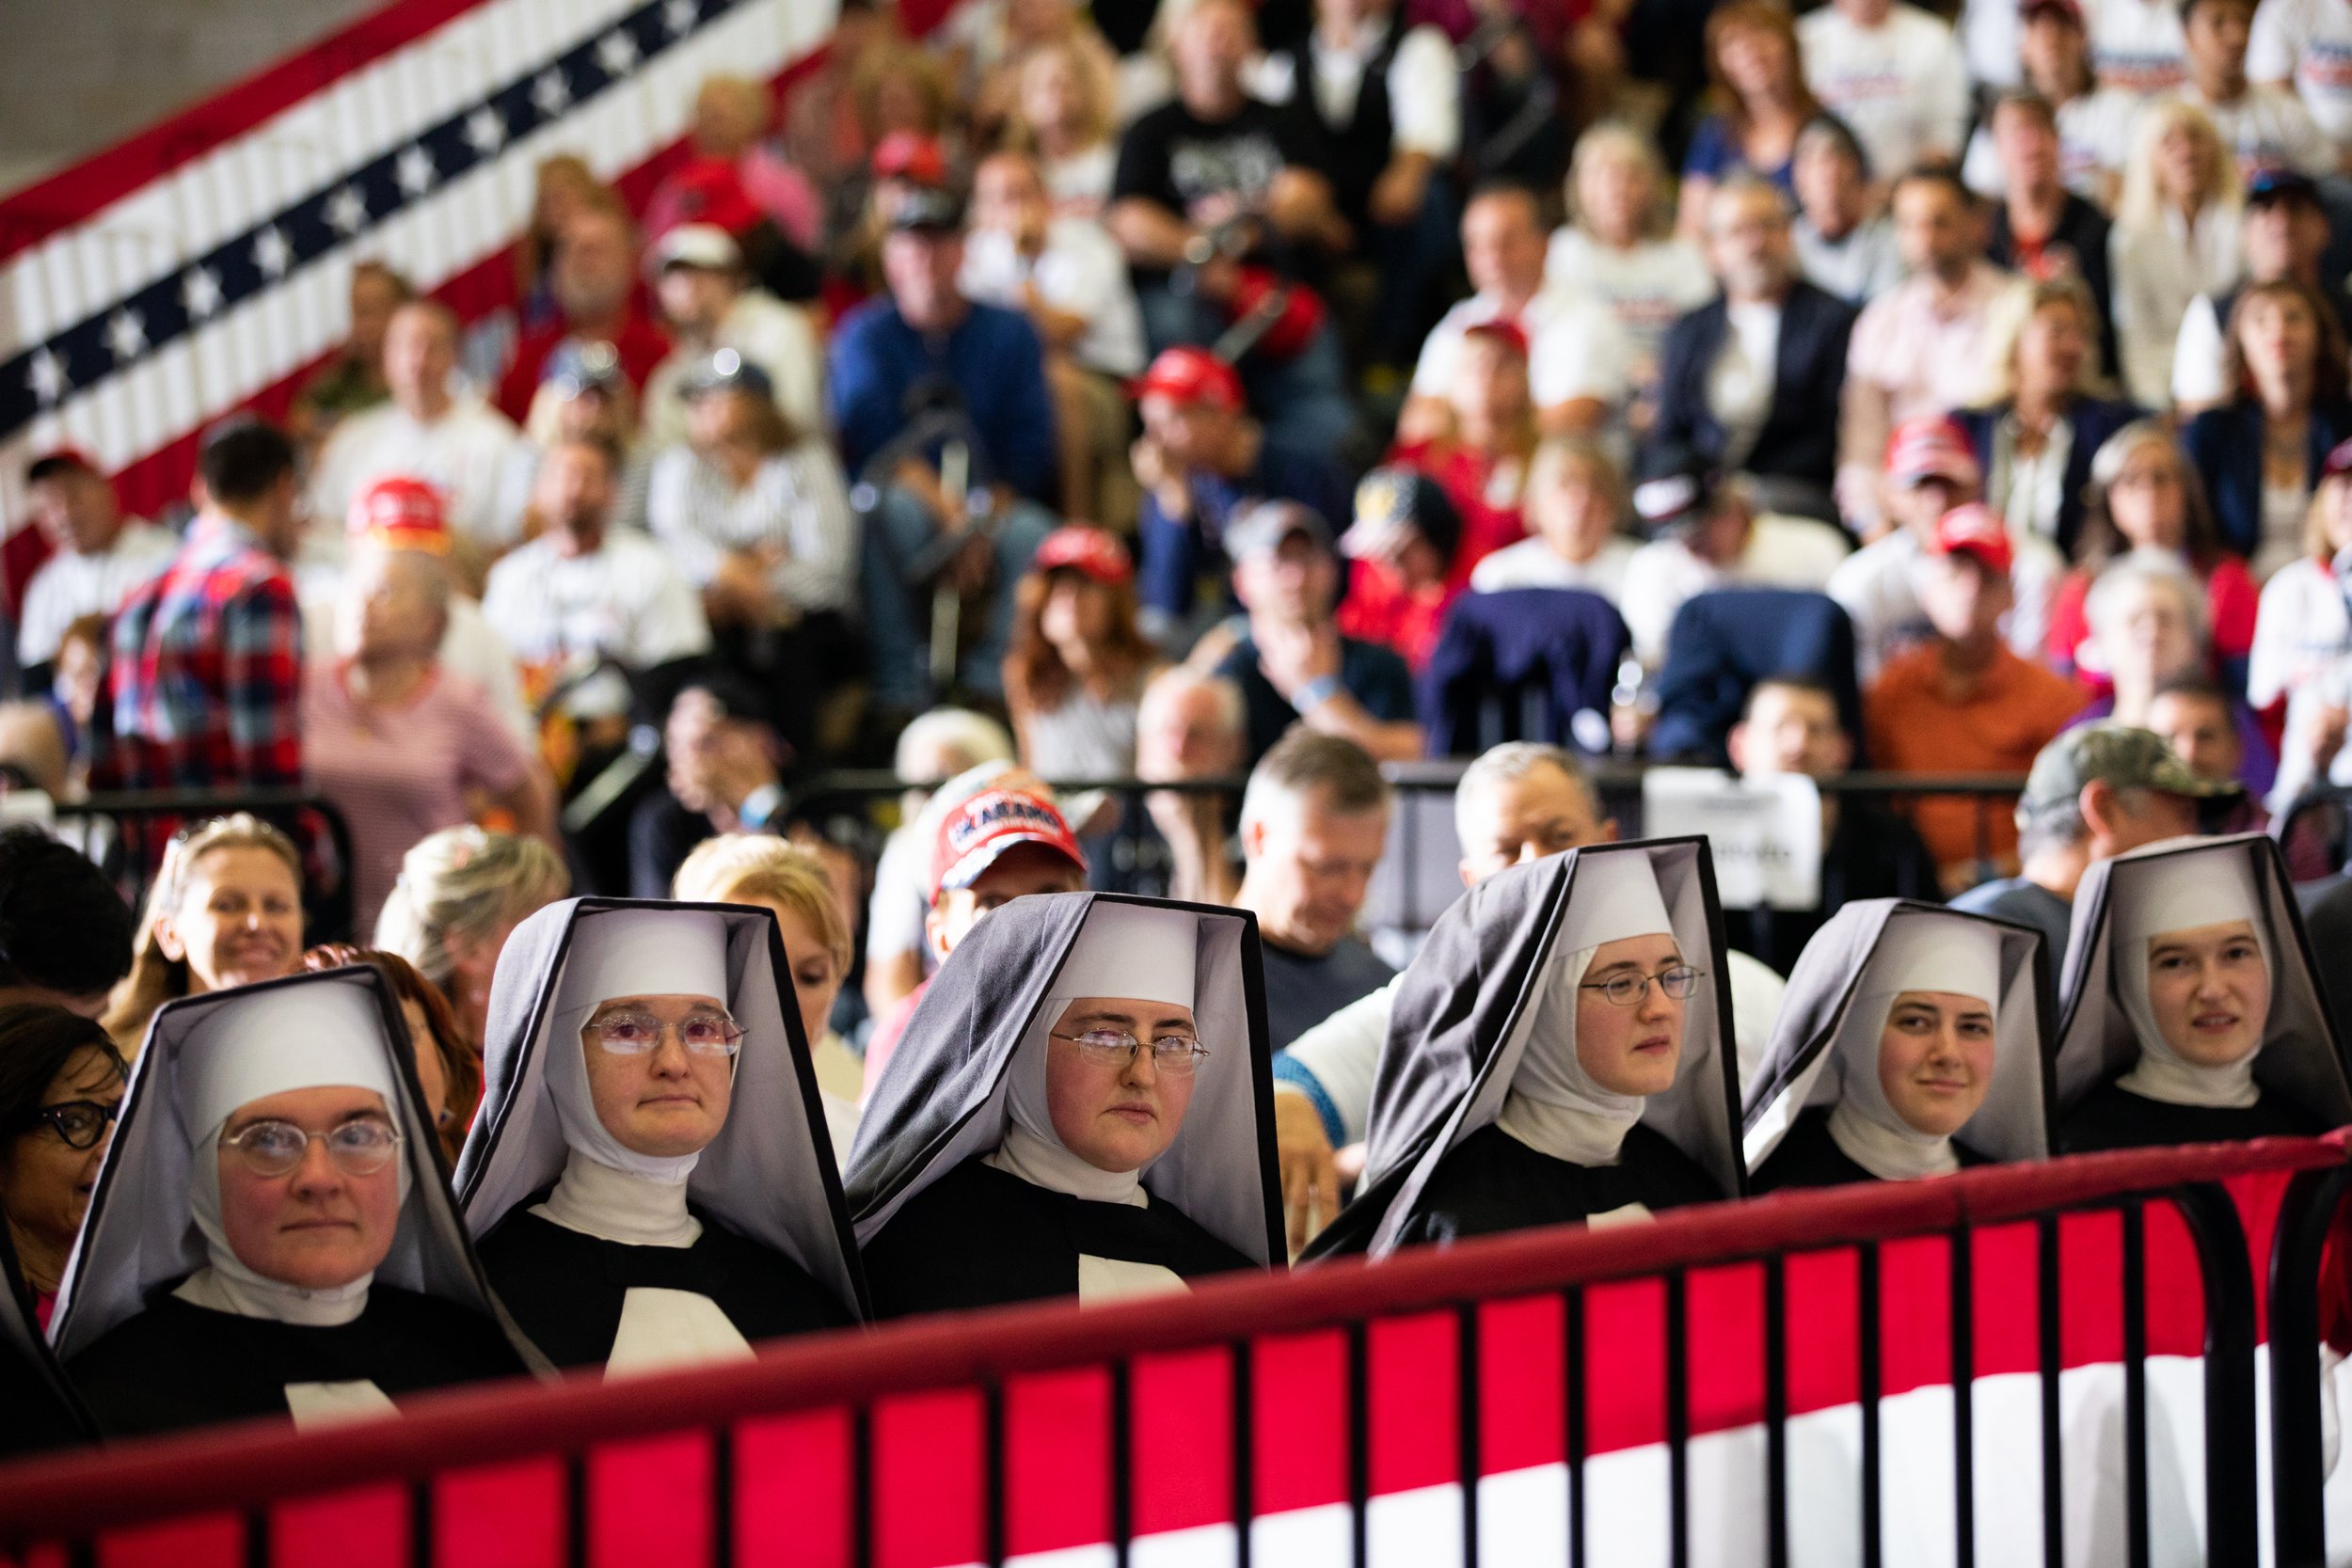  A group of woman dressed as nuns who identify as Dominican Sisters of the Immaculate Heart of Mary join supporters of Former President Donald Trump as they listen to speakers during a Save America rally on October 1, 2022 in Warren, Michigan. Trump 